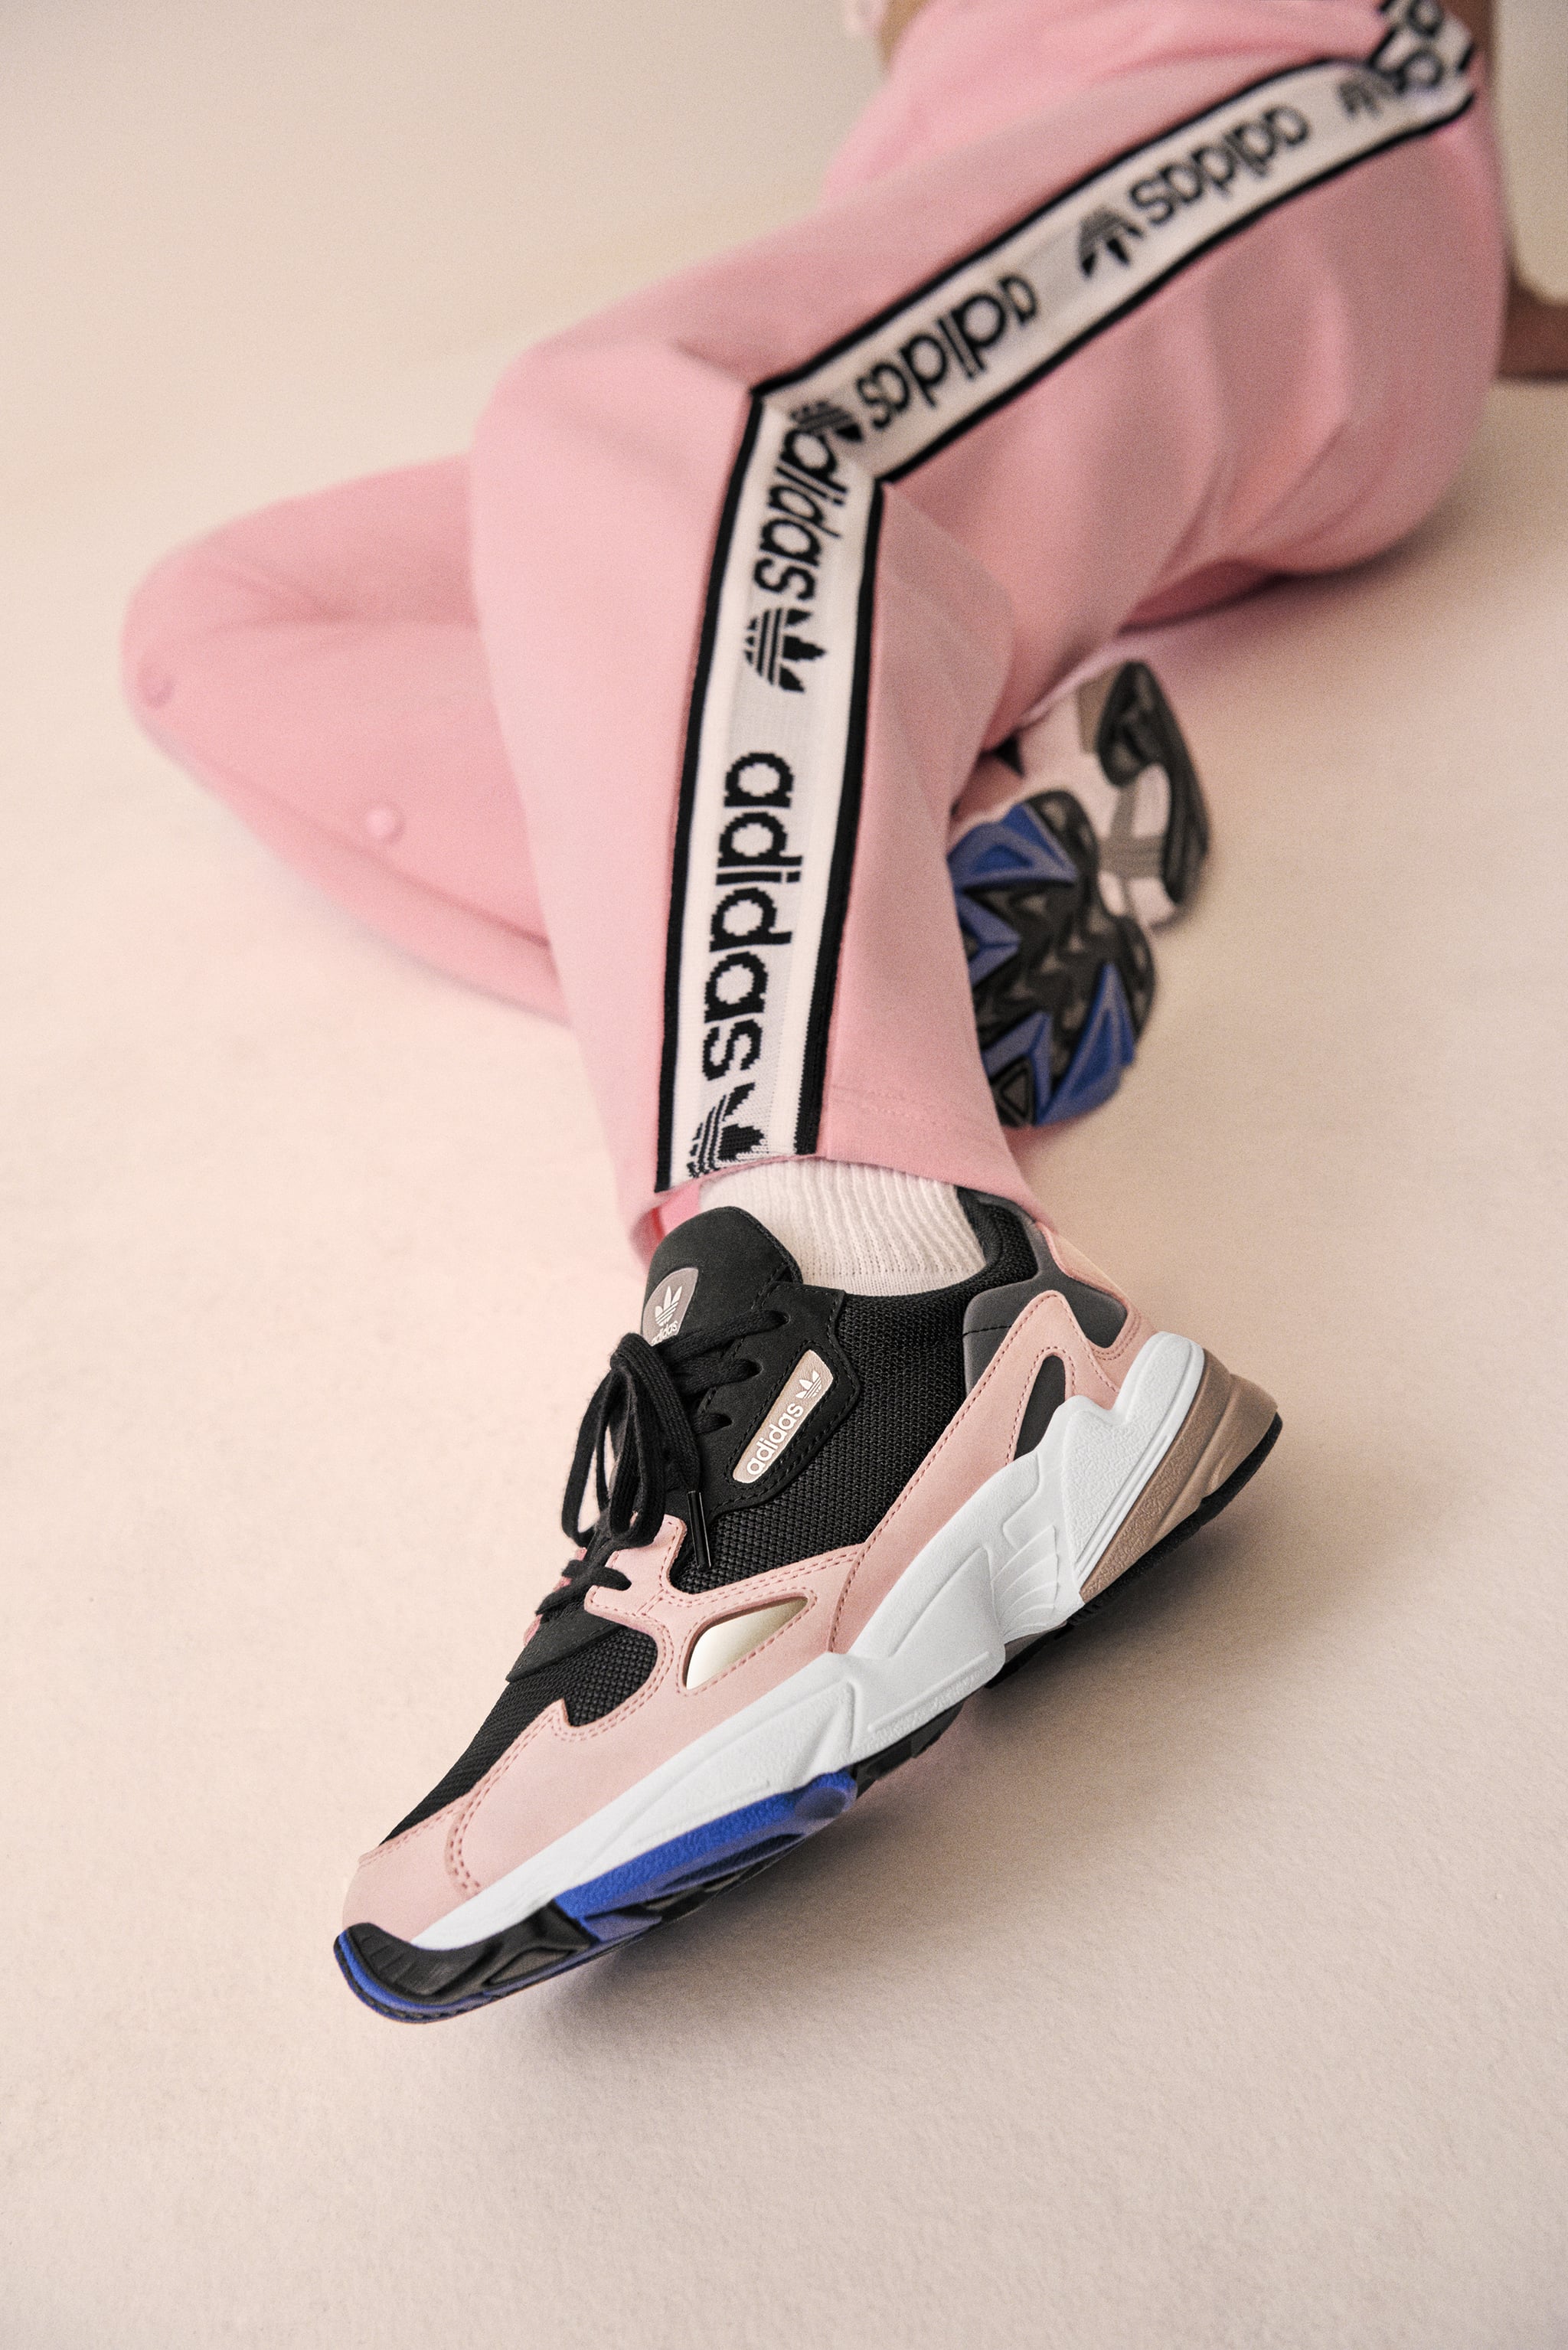 Fashion, Shopping & Style | With Kylie Modeling These Adidas Sneakers, Are Sure to Sell Out | POPSUGAR Fashion Photo 17